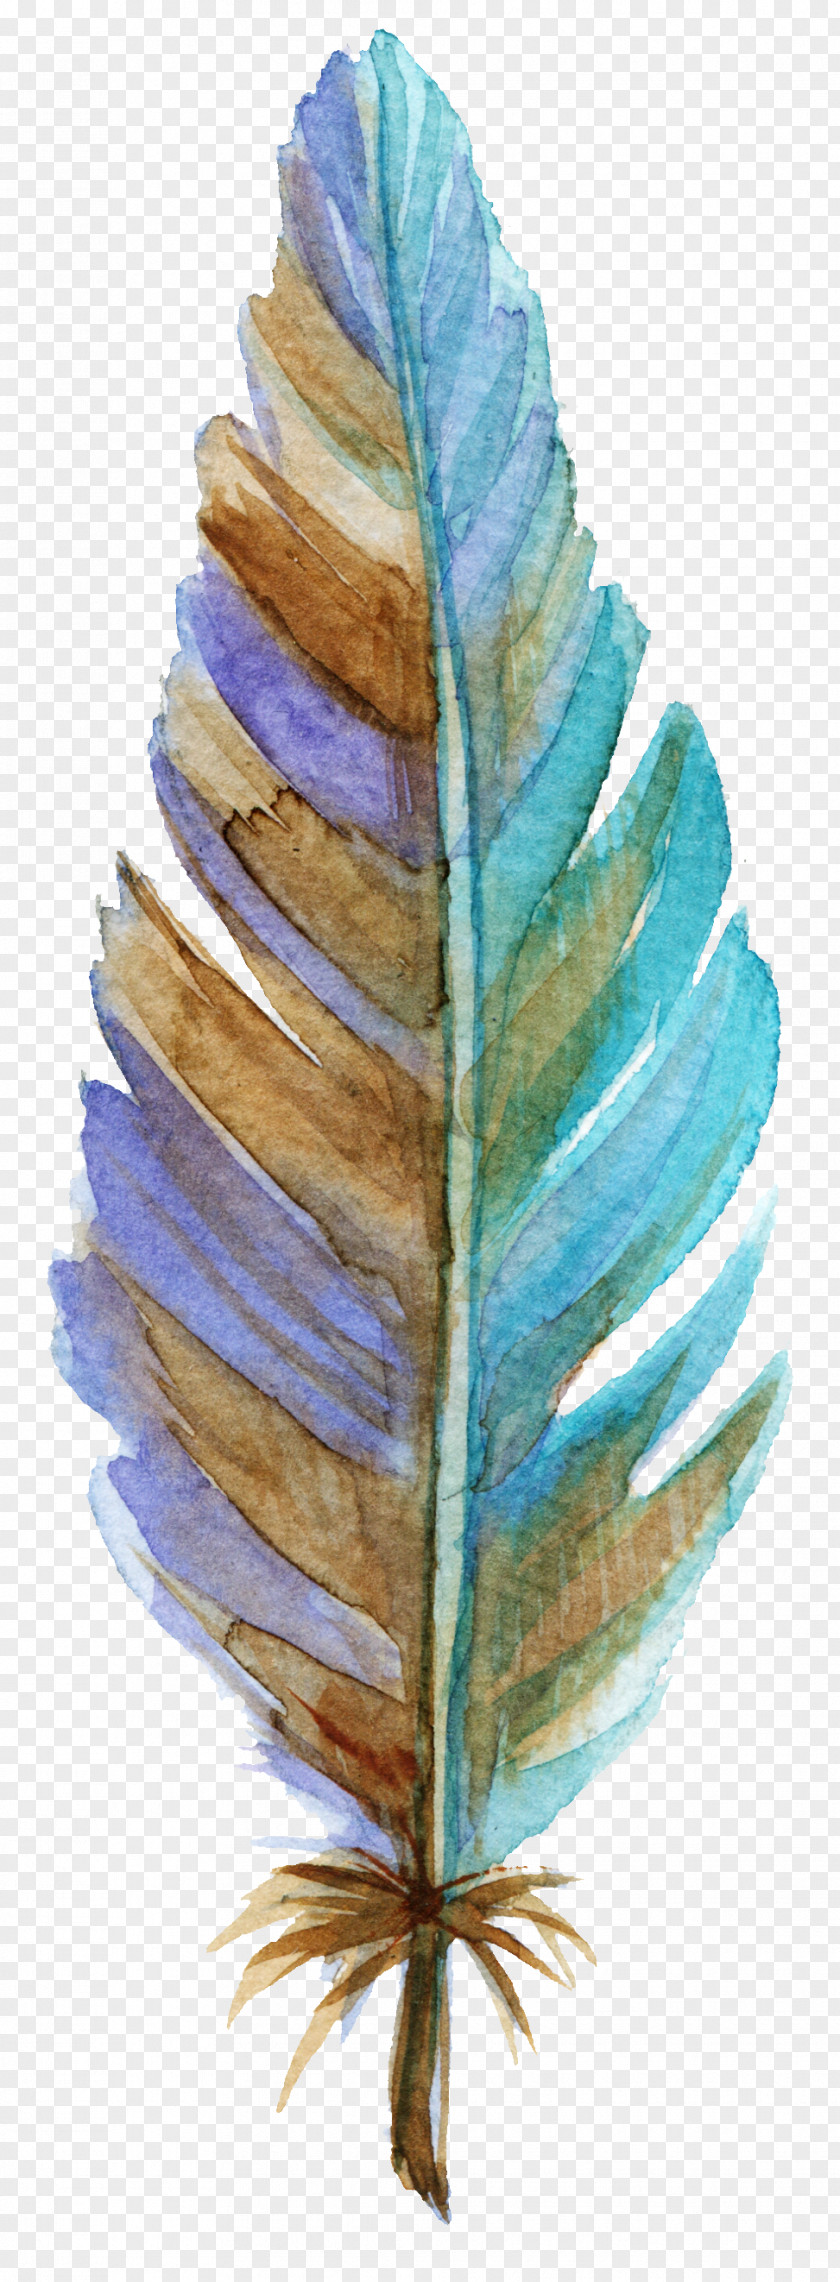 Blue Feather Leaves Leaf Texture Mapping PNG